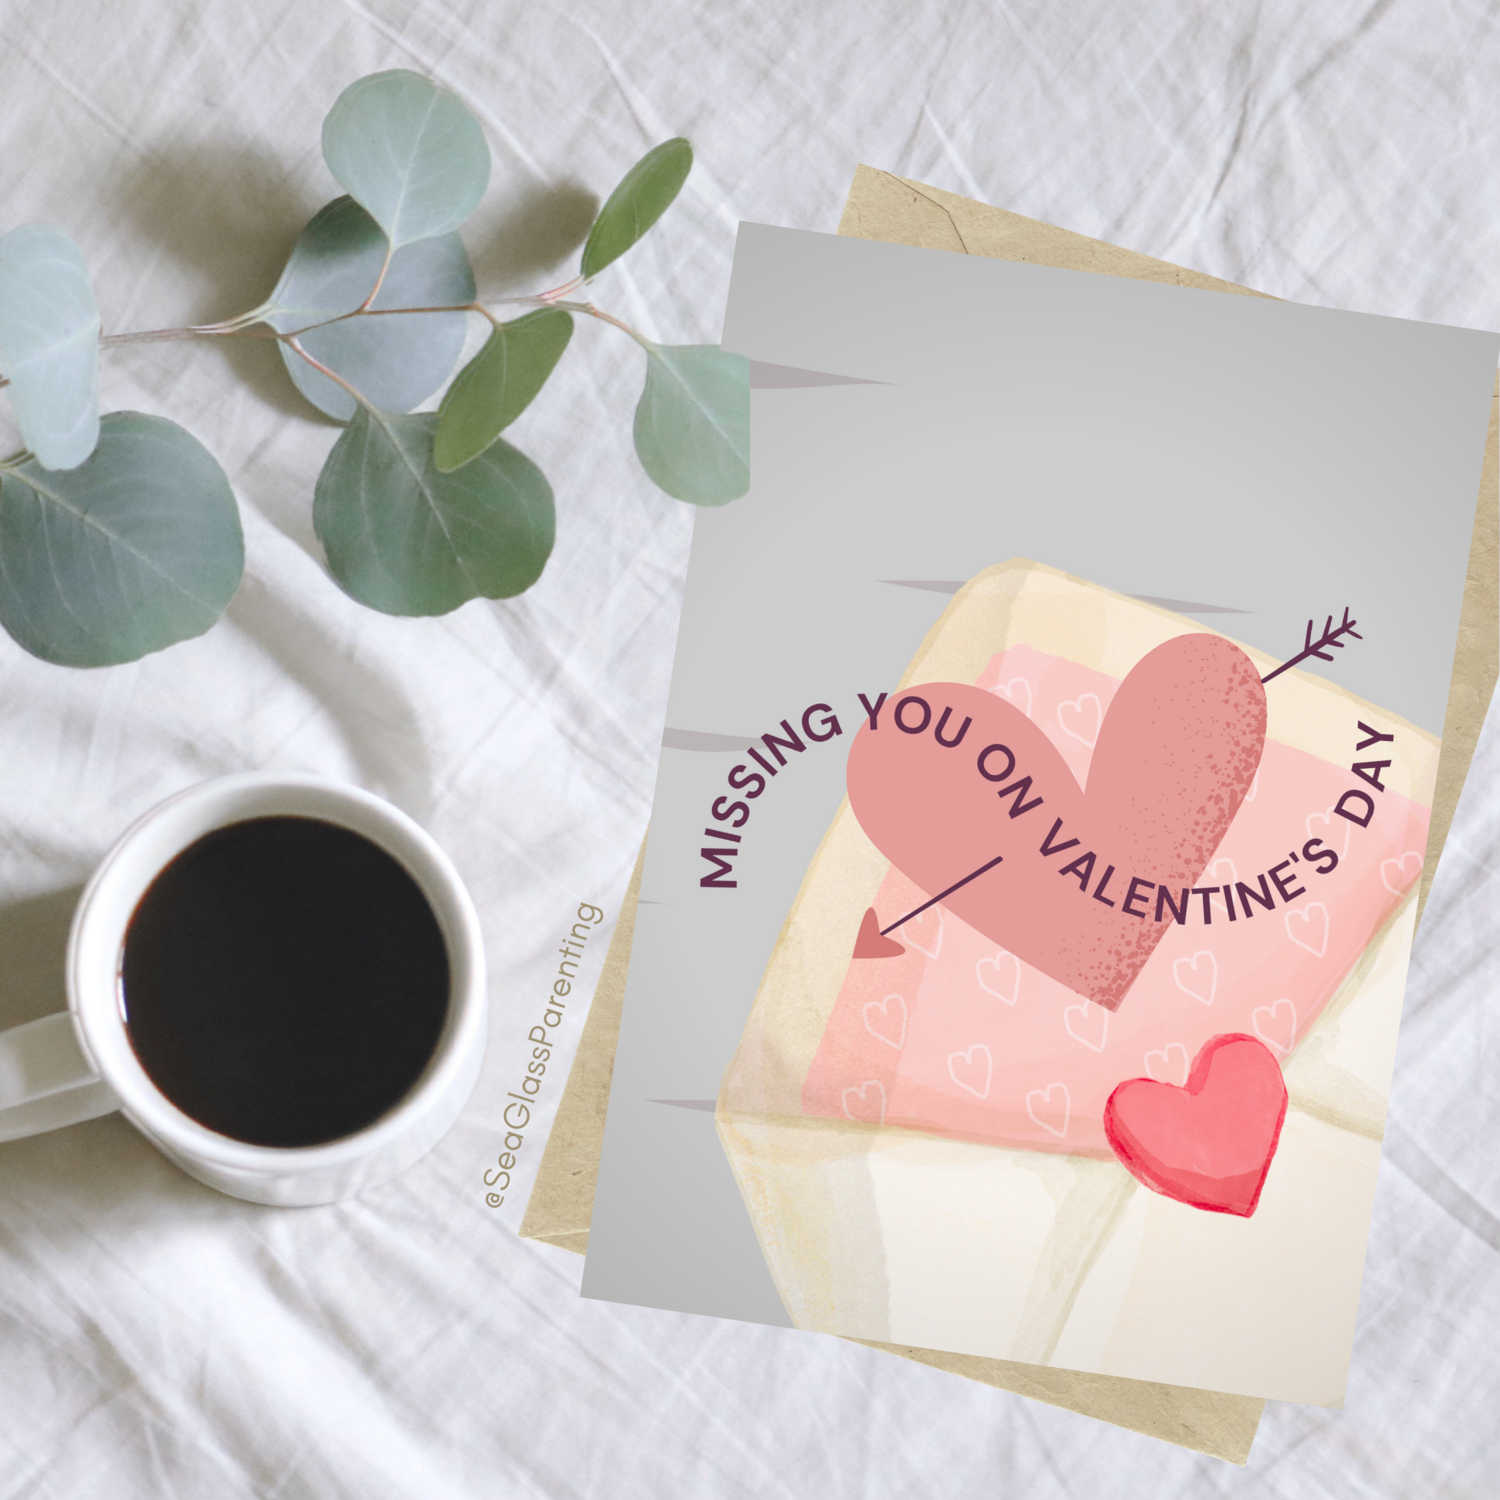 Missing you on Valentine's Day and Always—Holidays after loss (greeting card)